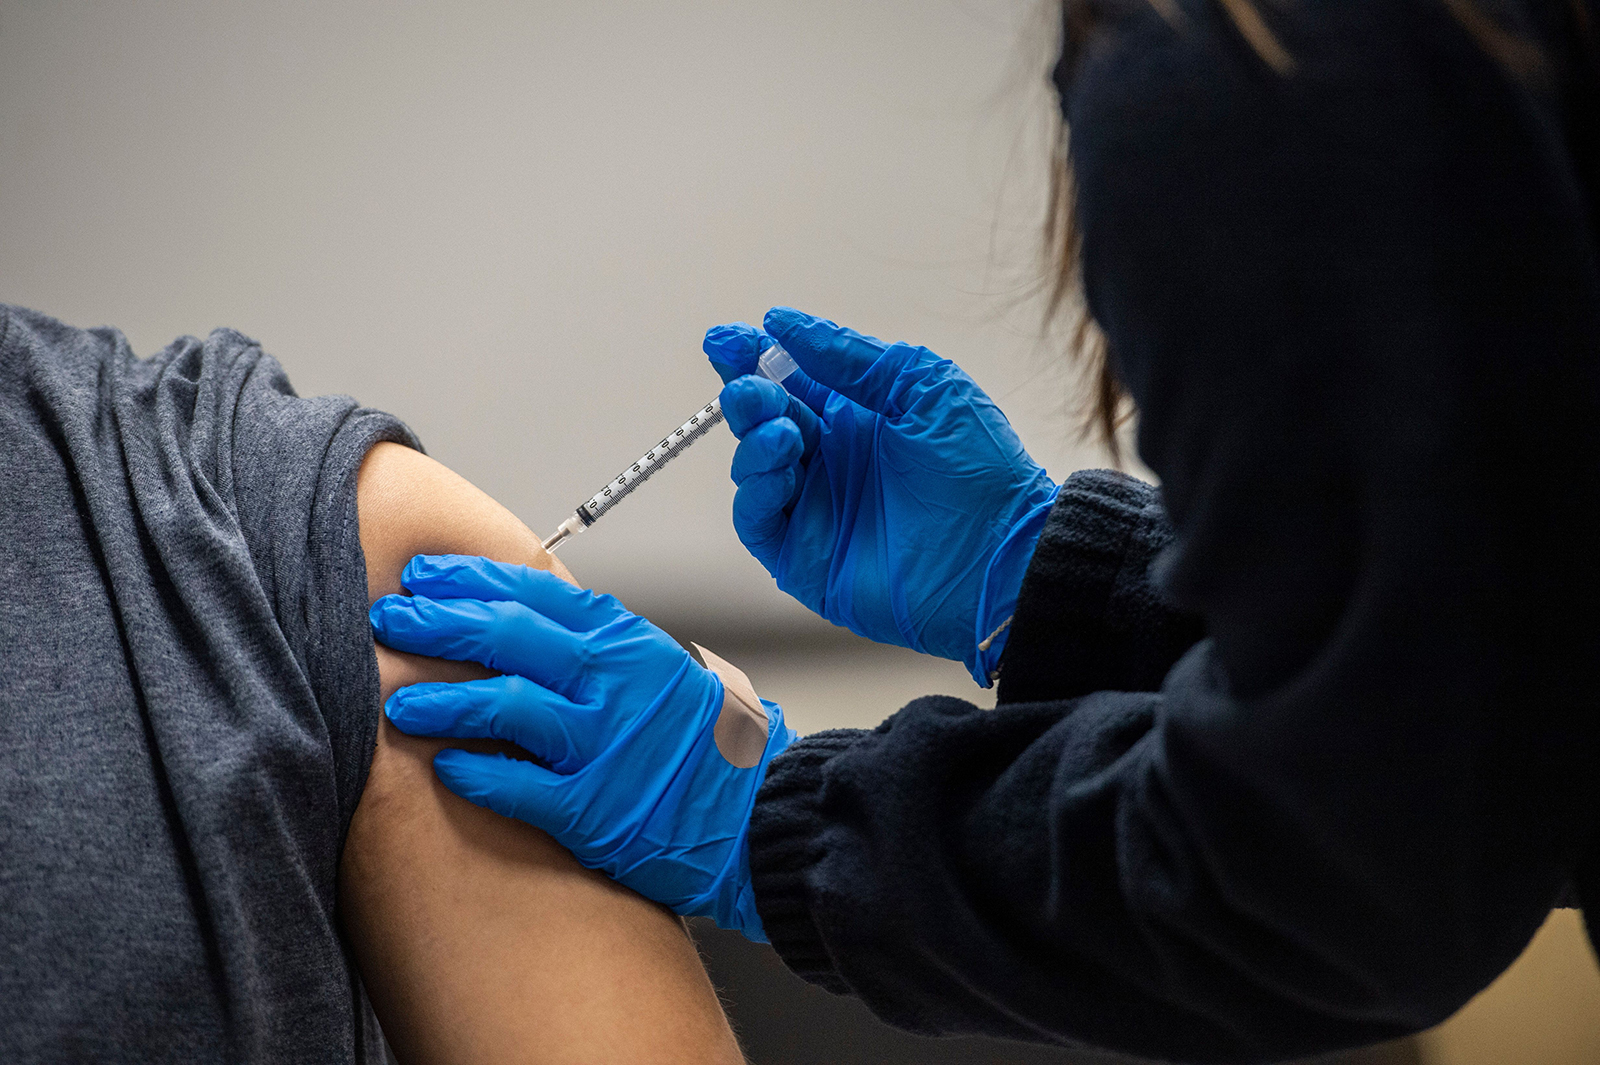 A man is inoculated with the Pfizer-BioNTech Covid-19 vaccine at La Colaborativa in Chelsea, Massachusetts on February 16.